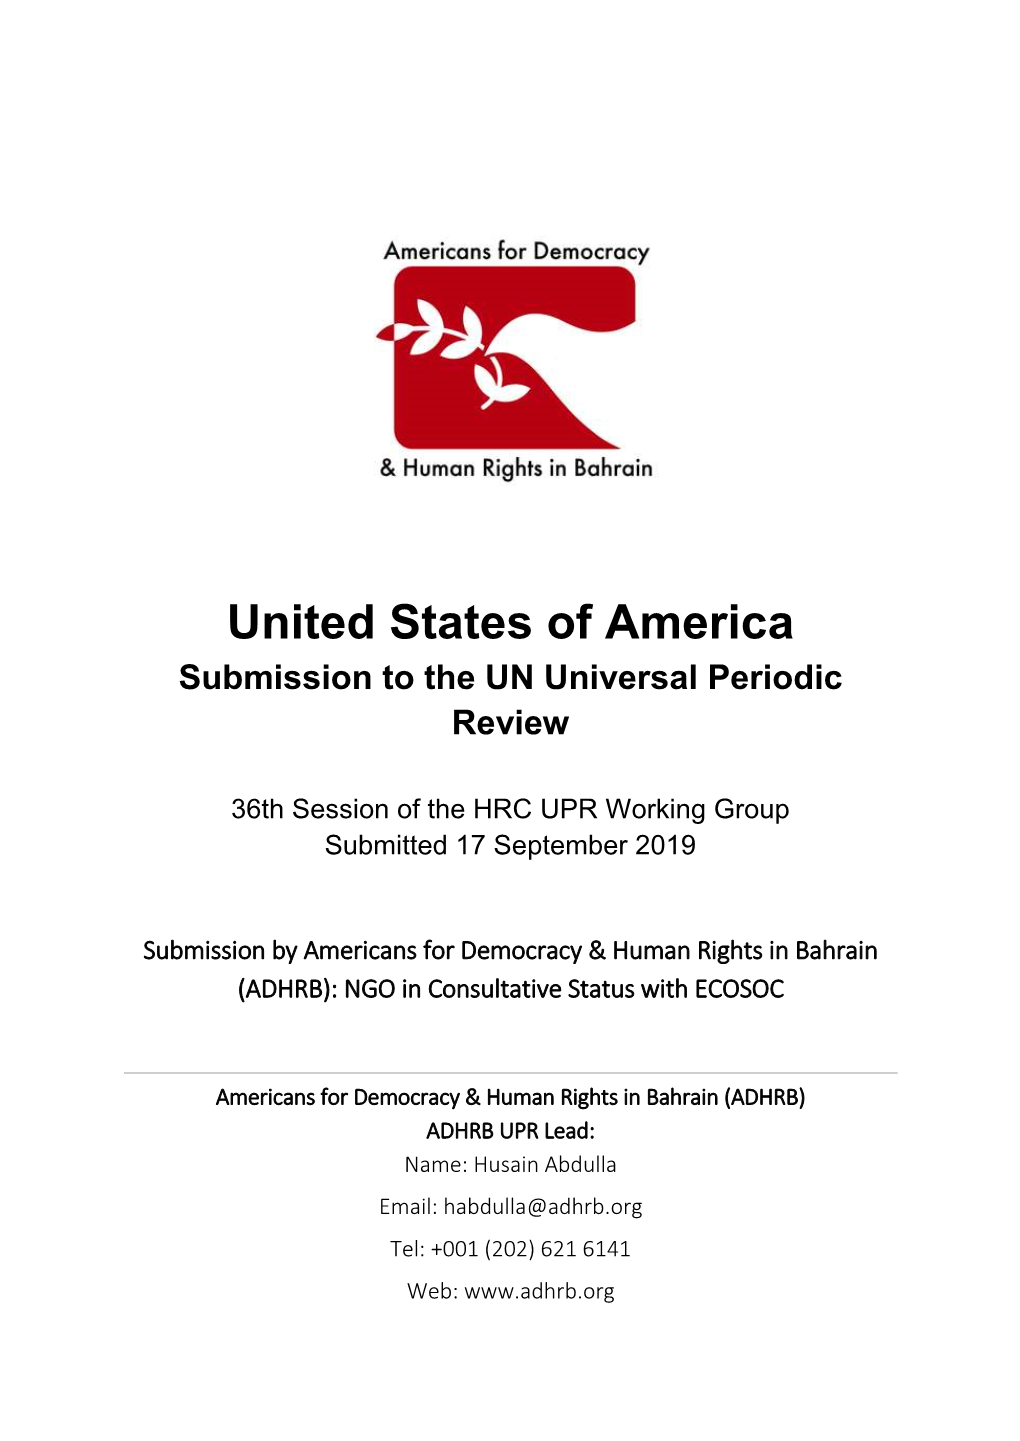 United States of America Submission to the UN Universal Periodic Review